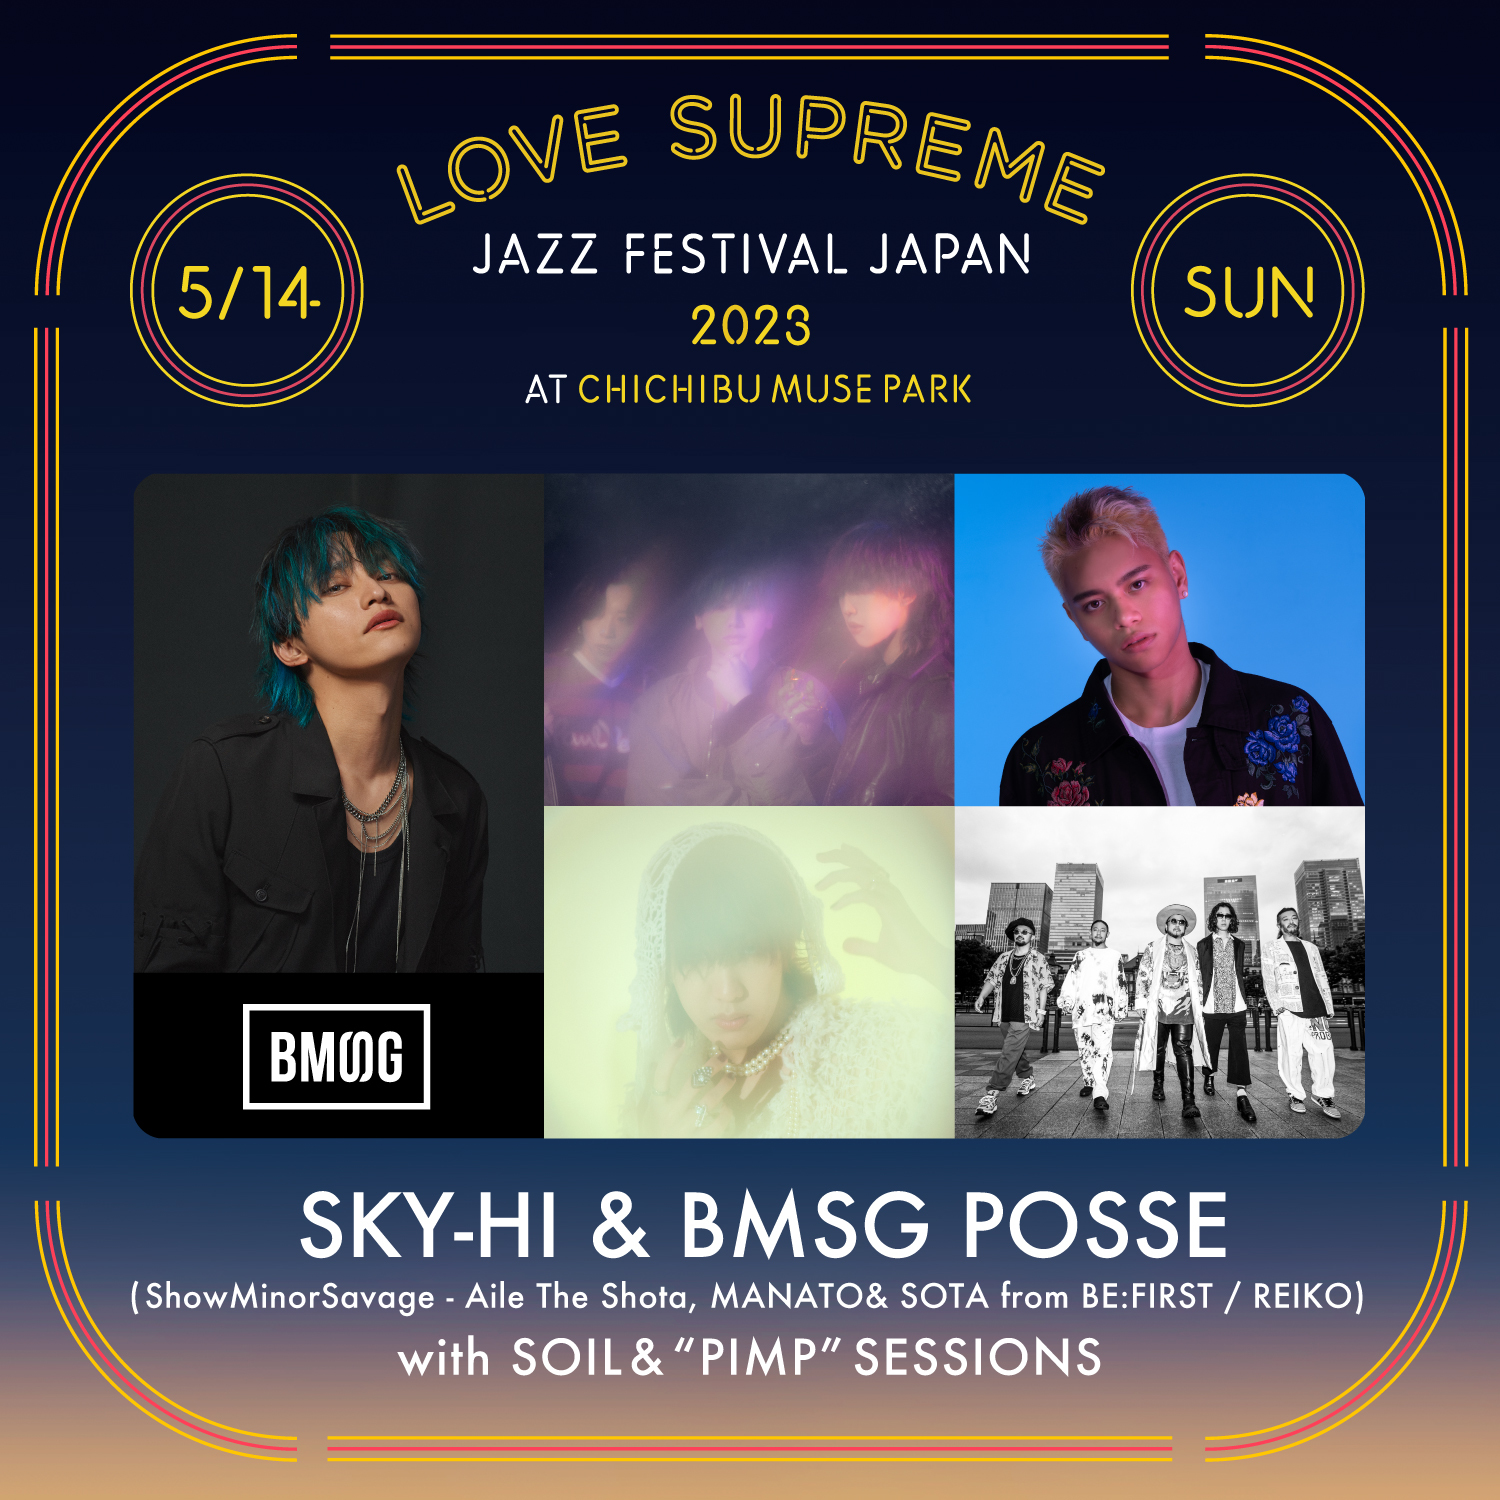 SKY-HI & BMSG POSSE(ShowMinorSavage - Aile The Shota, MANATO&SOTA from BE:FIRST / REIKO) with SOIL&"PIMP"SESSIONS